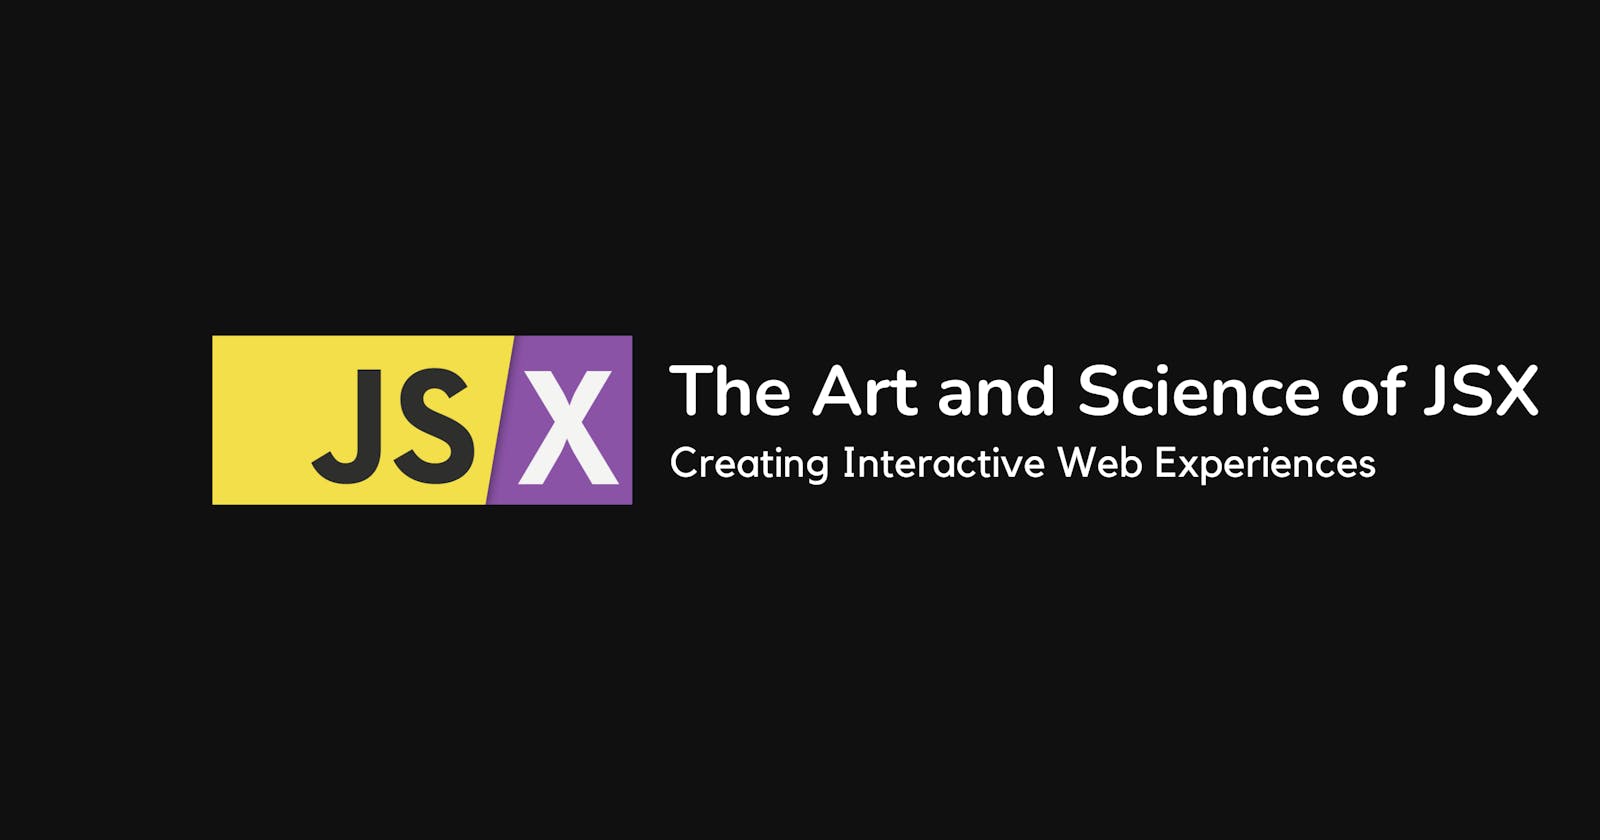 The Art and Science of JSX